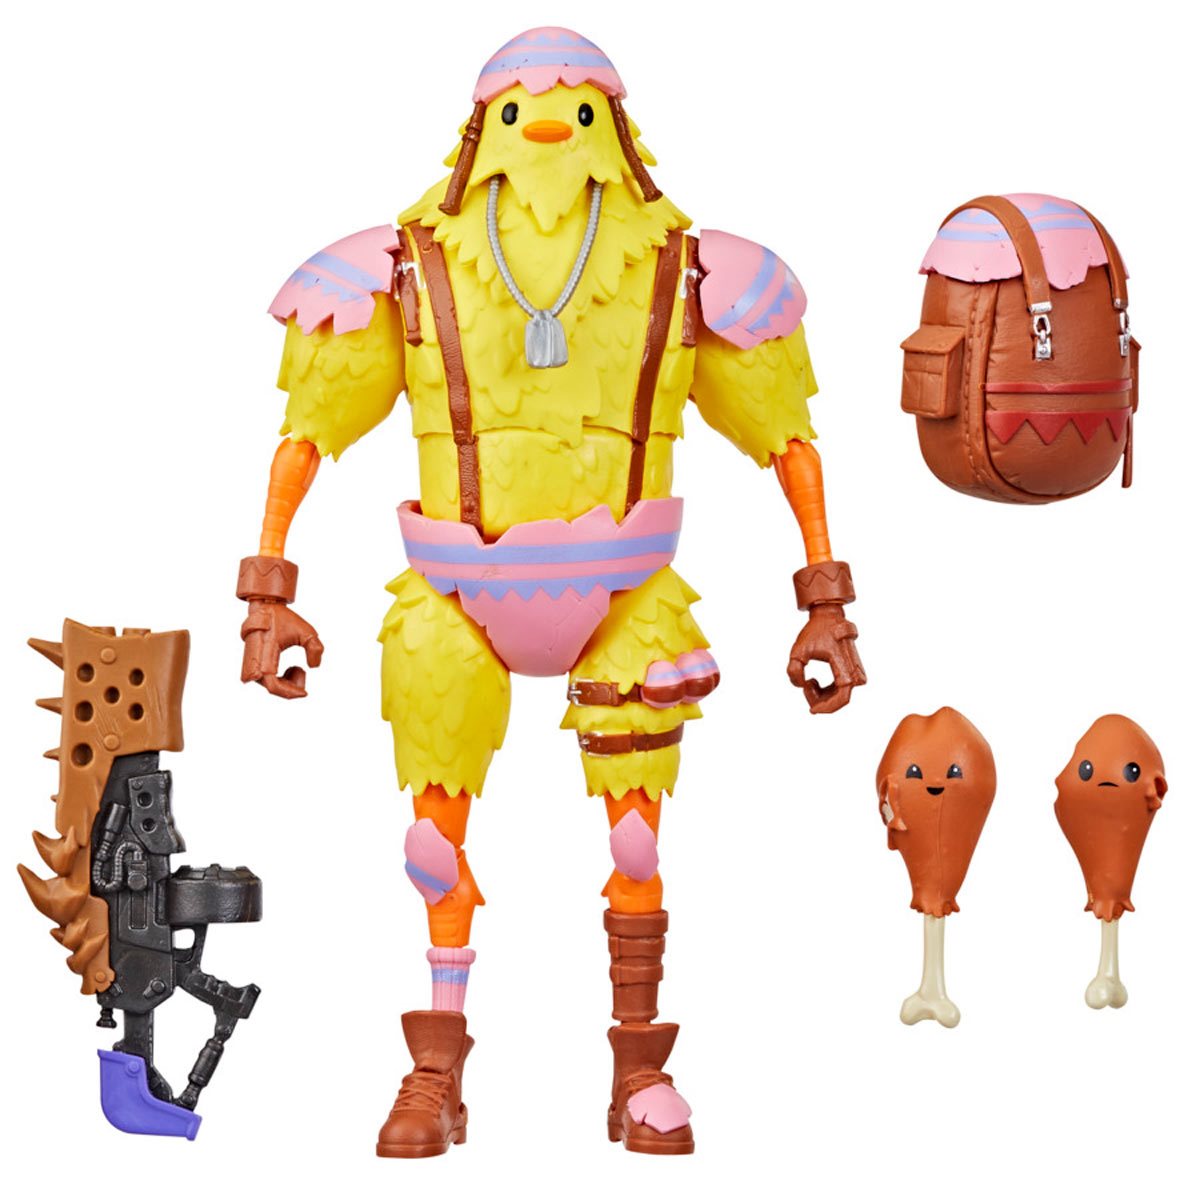 Fortnite Victory Royale Series - Cluck 6-Inch Action Figure